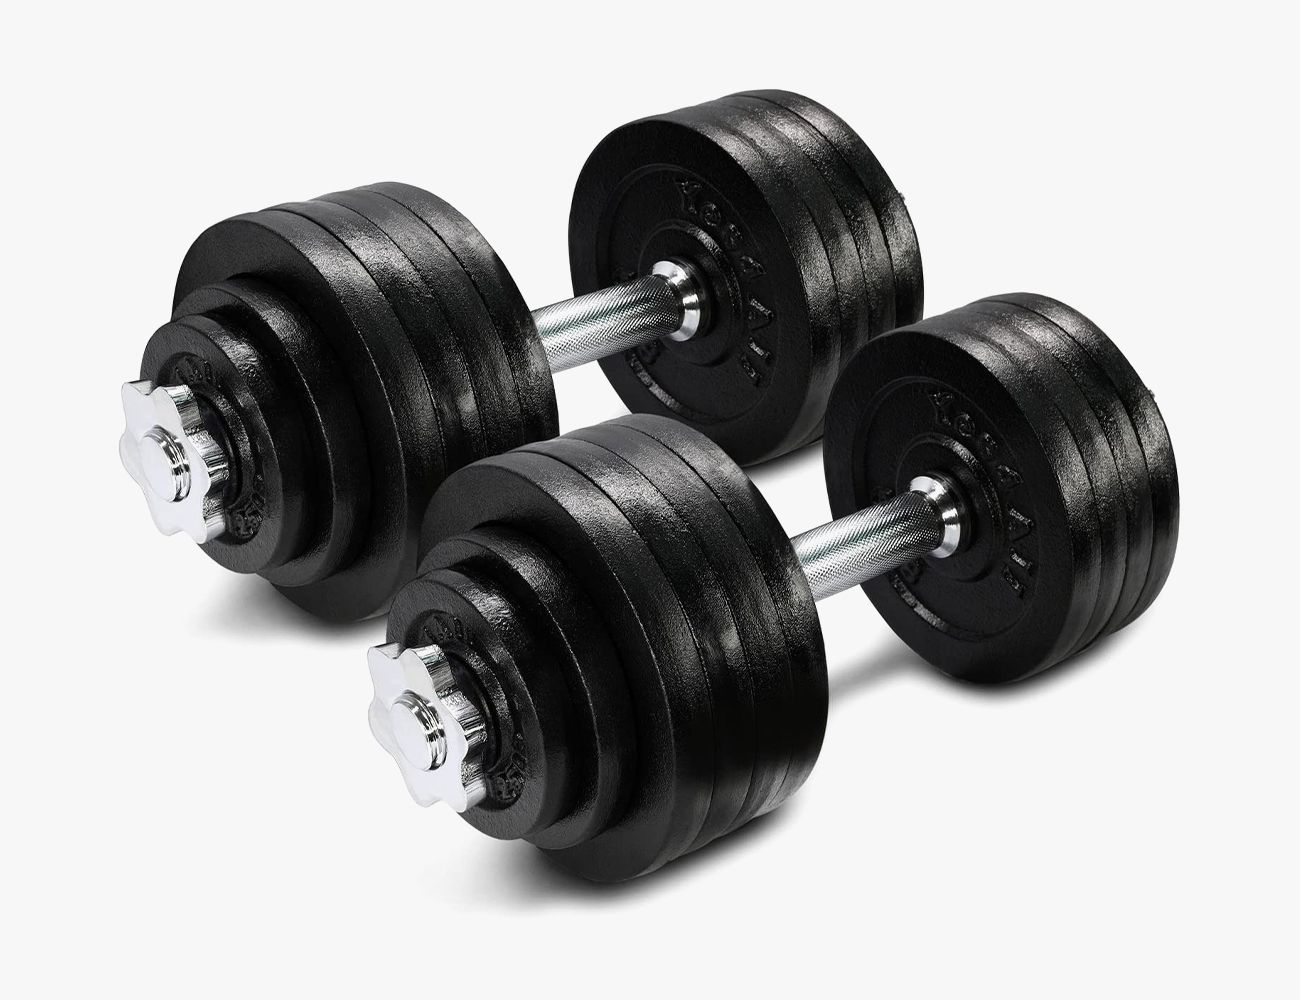 ONE REPLACEMENT WEIGHT ONLY Reebok Adjust-A-Weights Dumbbells 